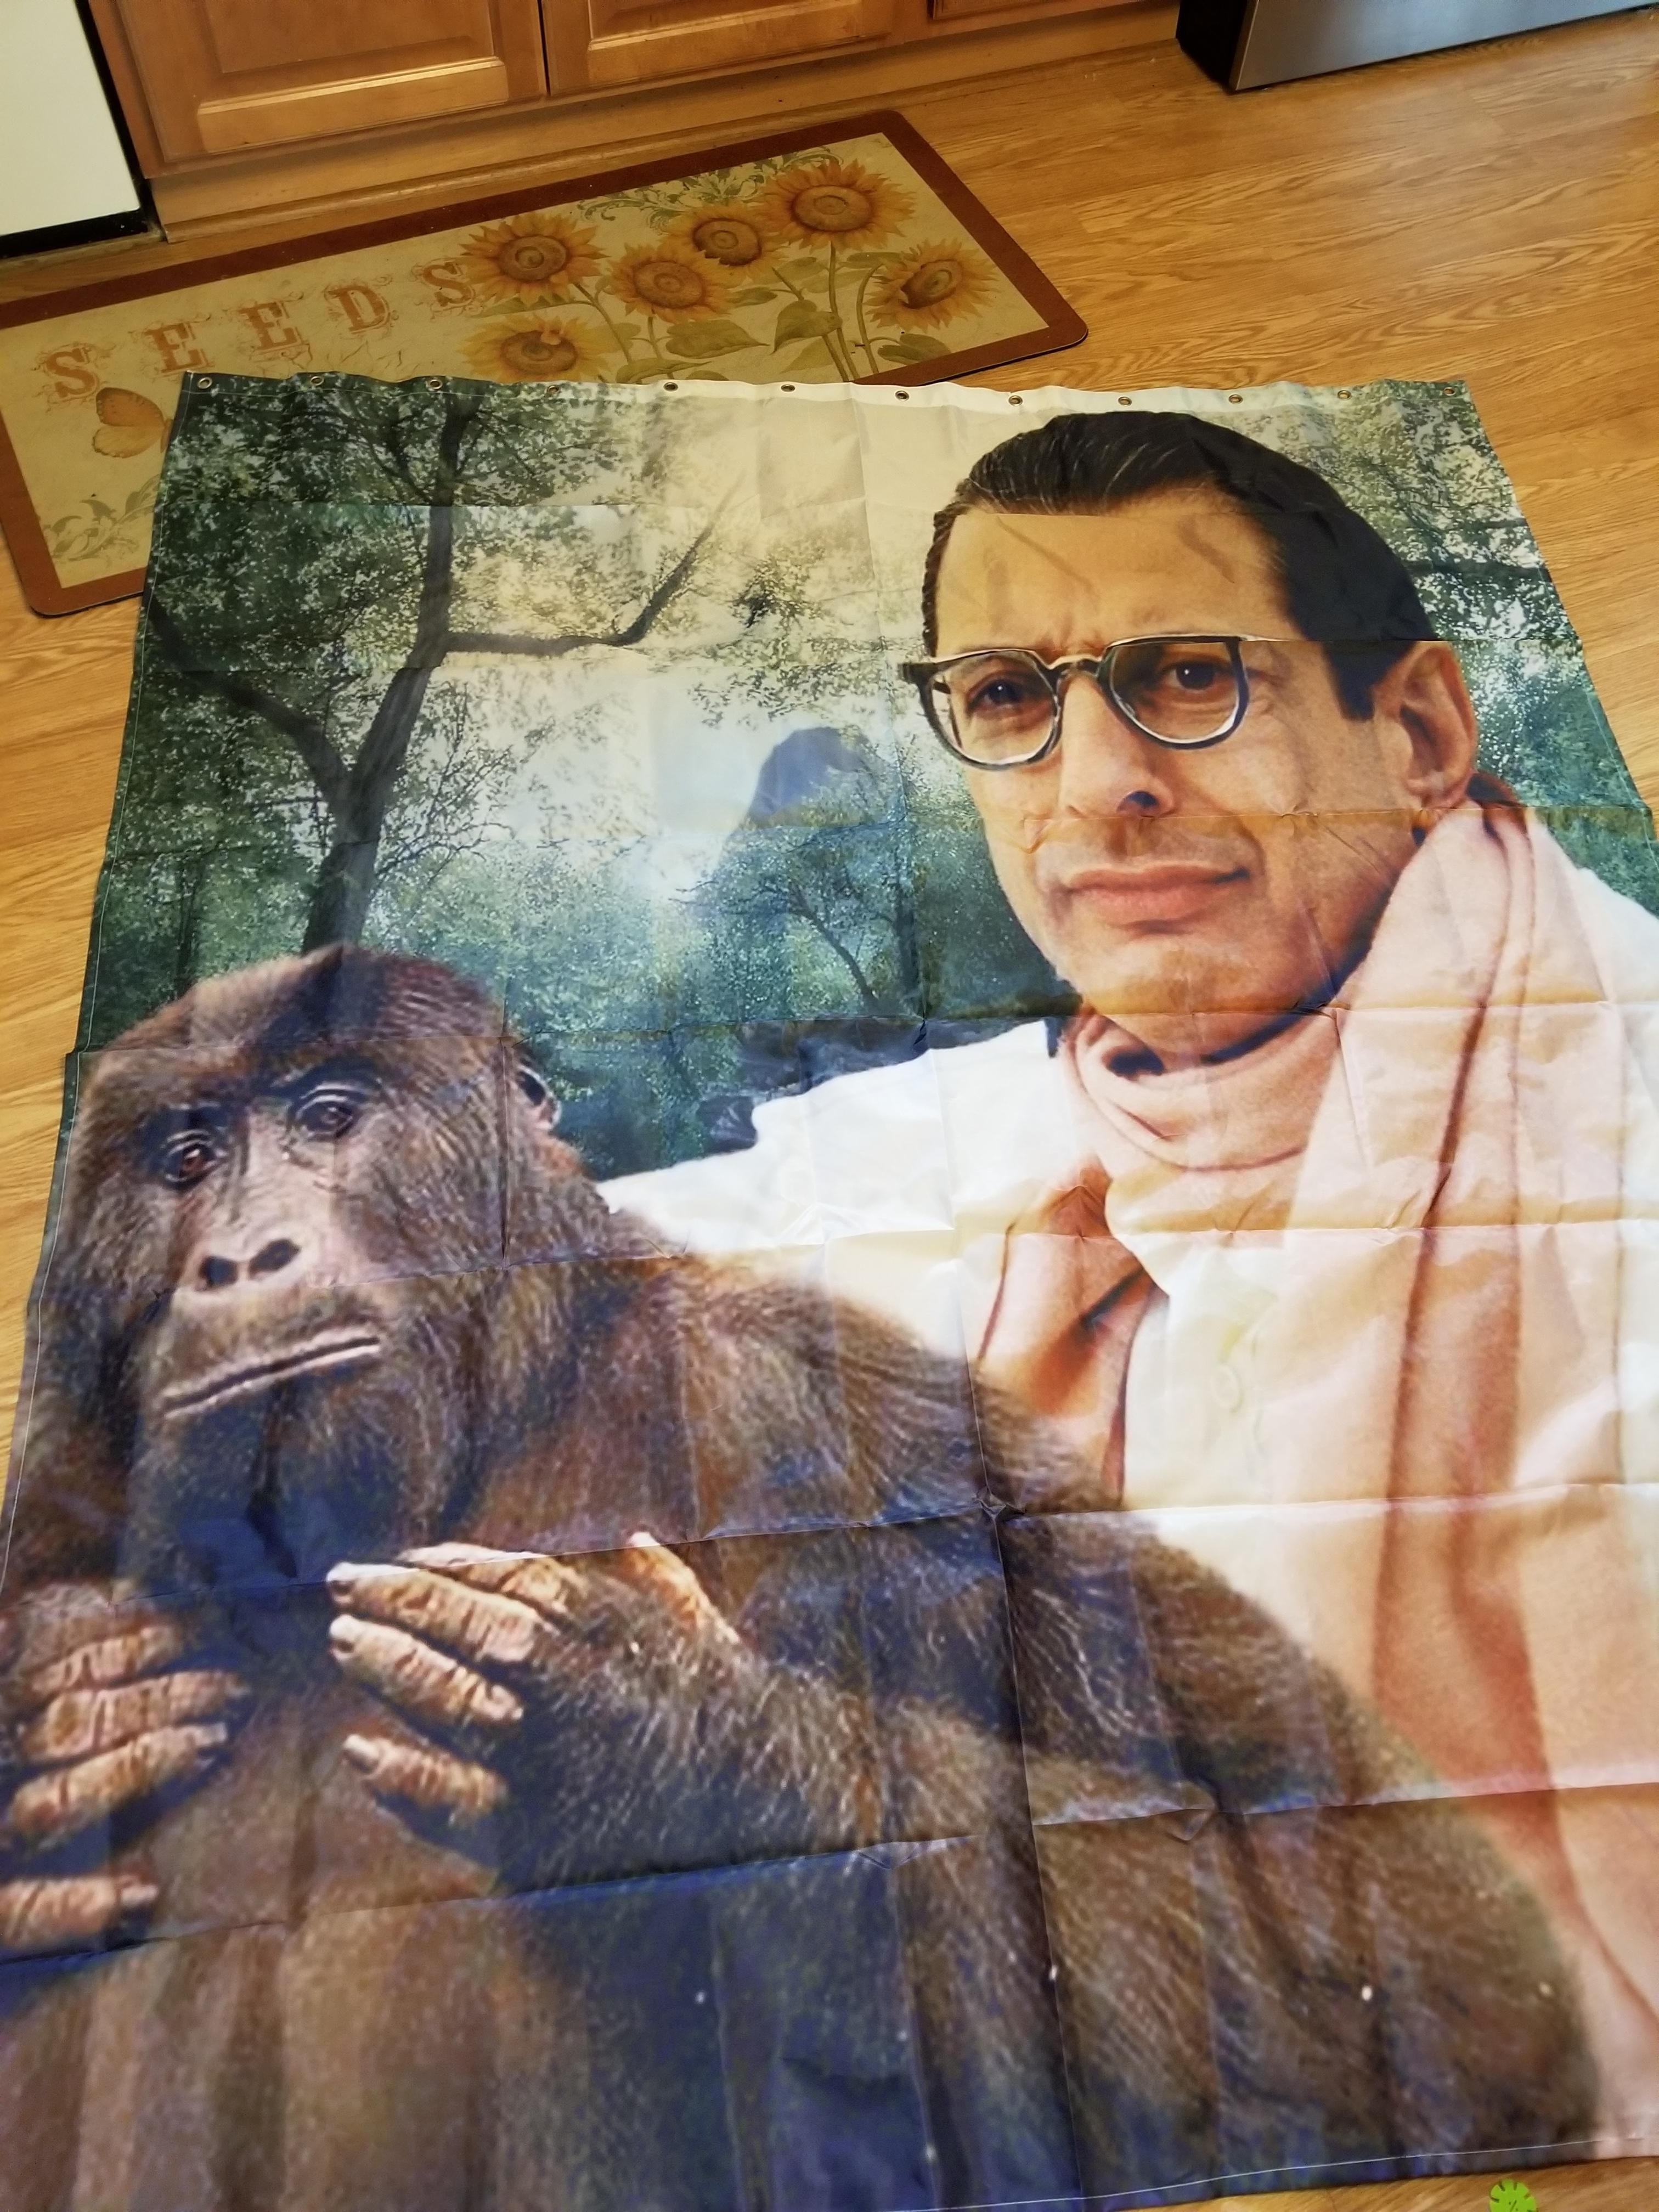 This shower curtain arrived in the mail today. As it was opened, my wife about died. Effective immediately, my wife's house decorating privileges have been revoked.